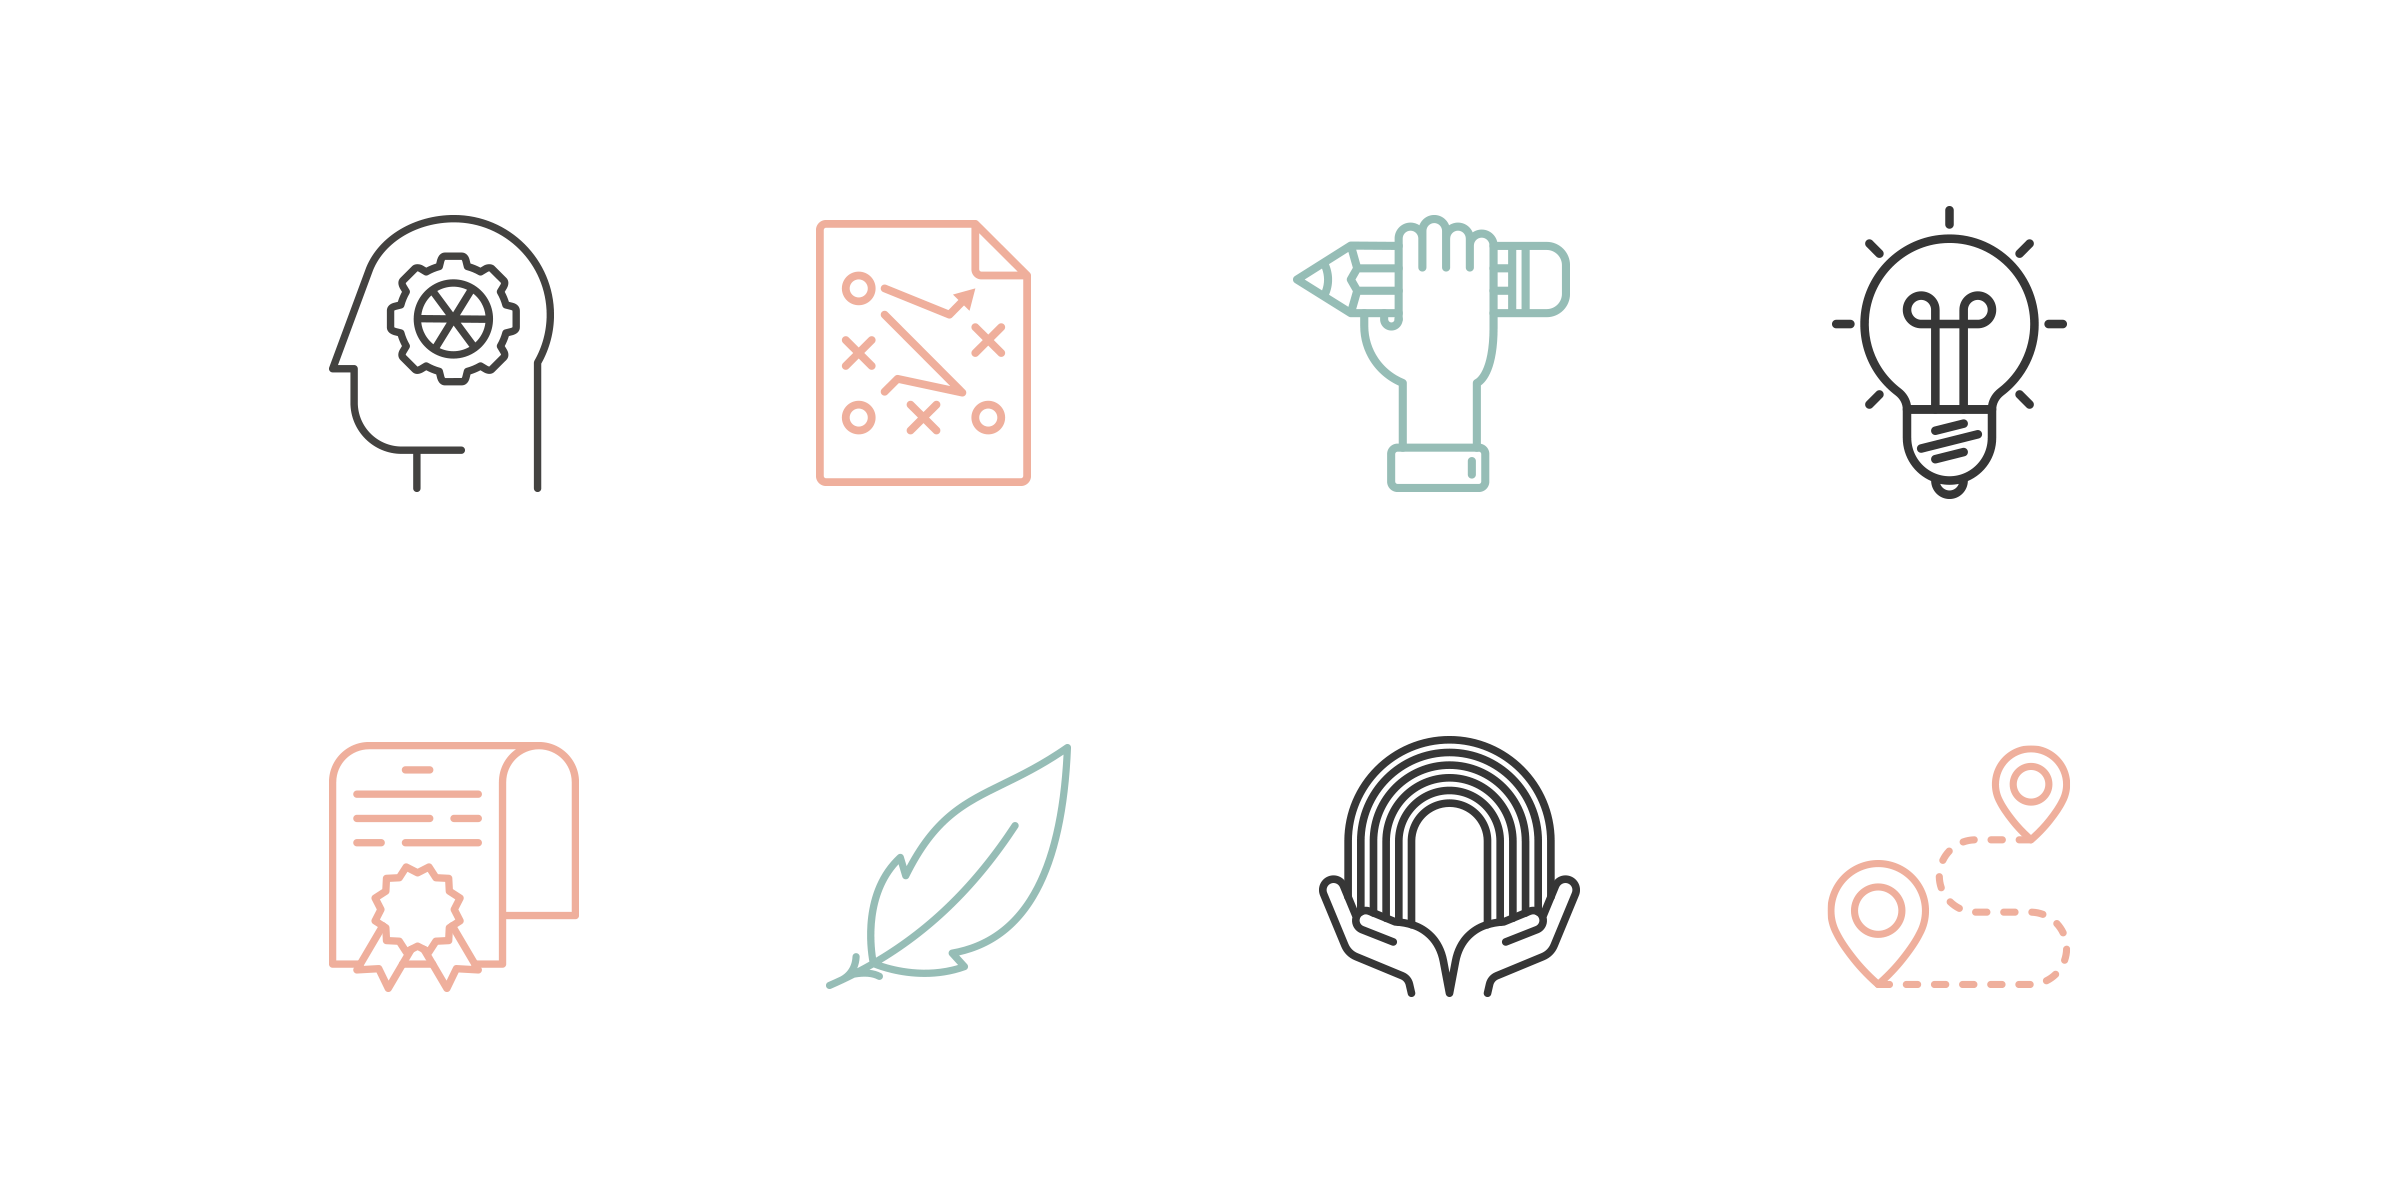 set of 8 thin line icons to represent ideas like priorities, managing, writing essays, and the various programs Paige offers